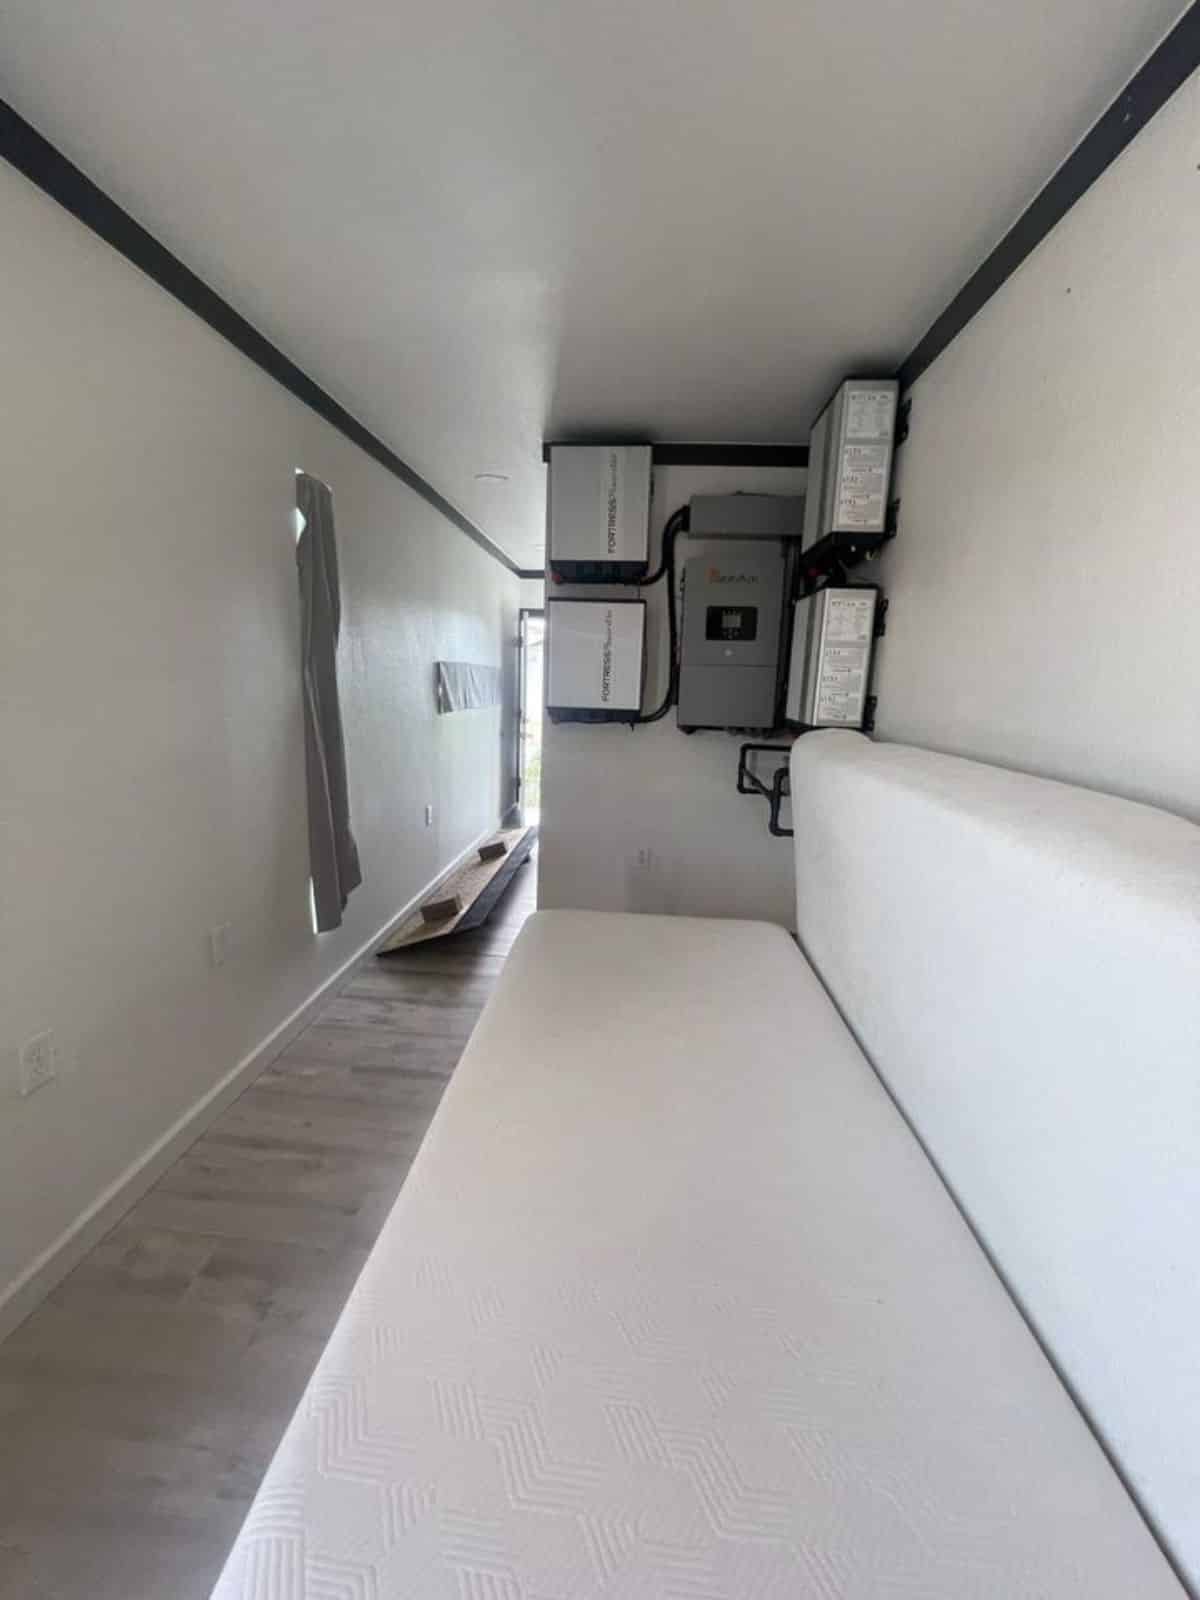 Long passage and living area of offgrid container home